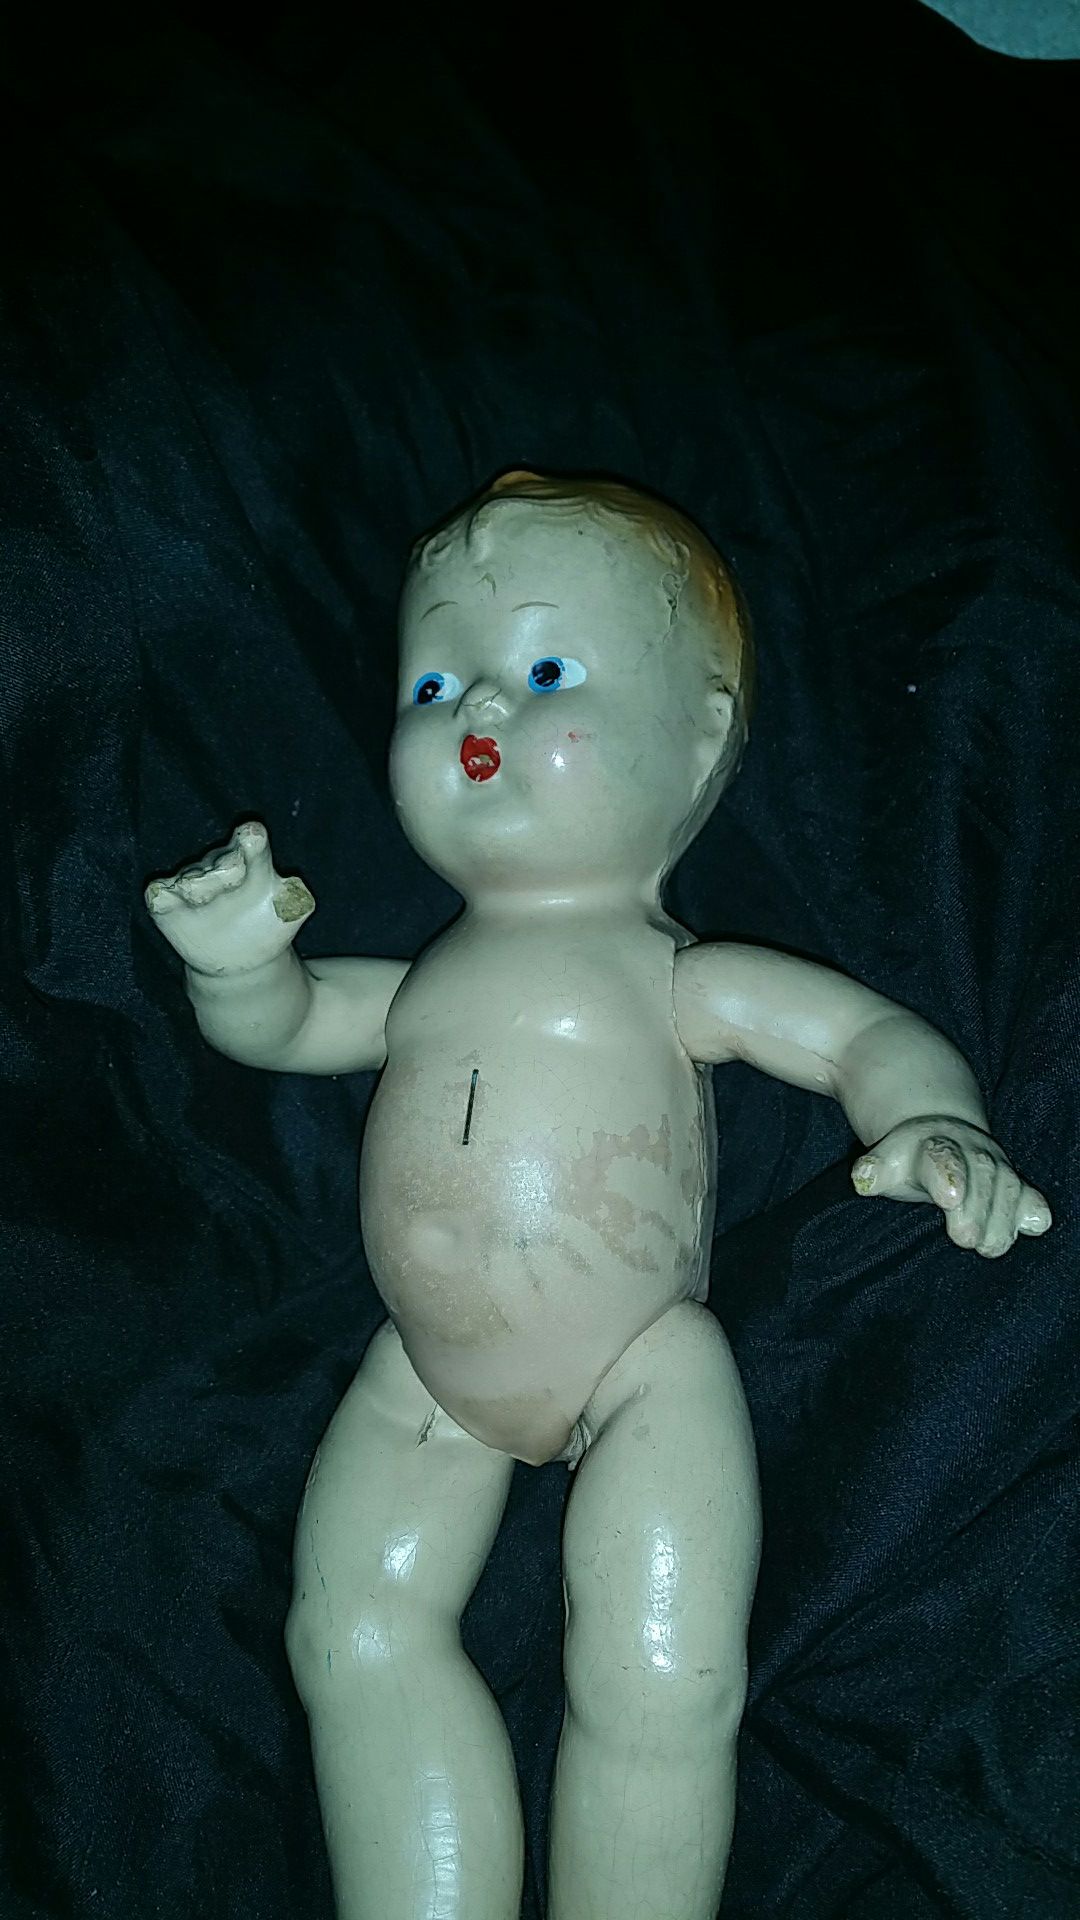 Antique doll from early 1900's $45